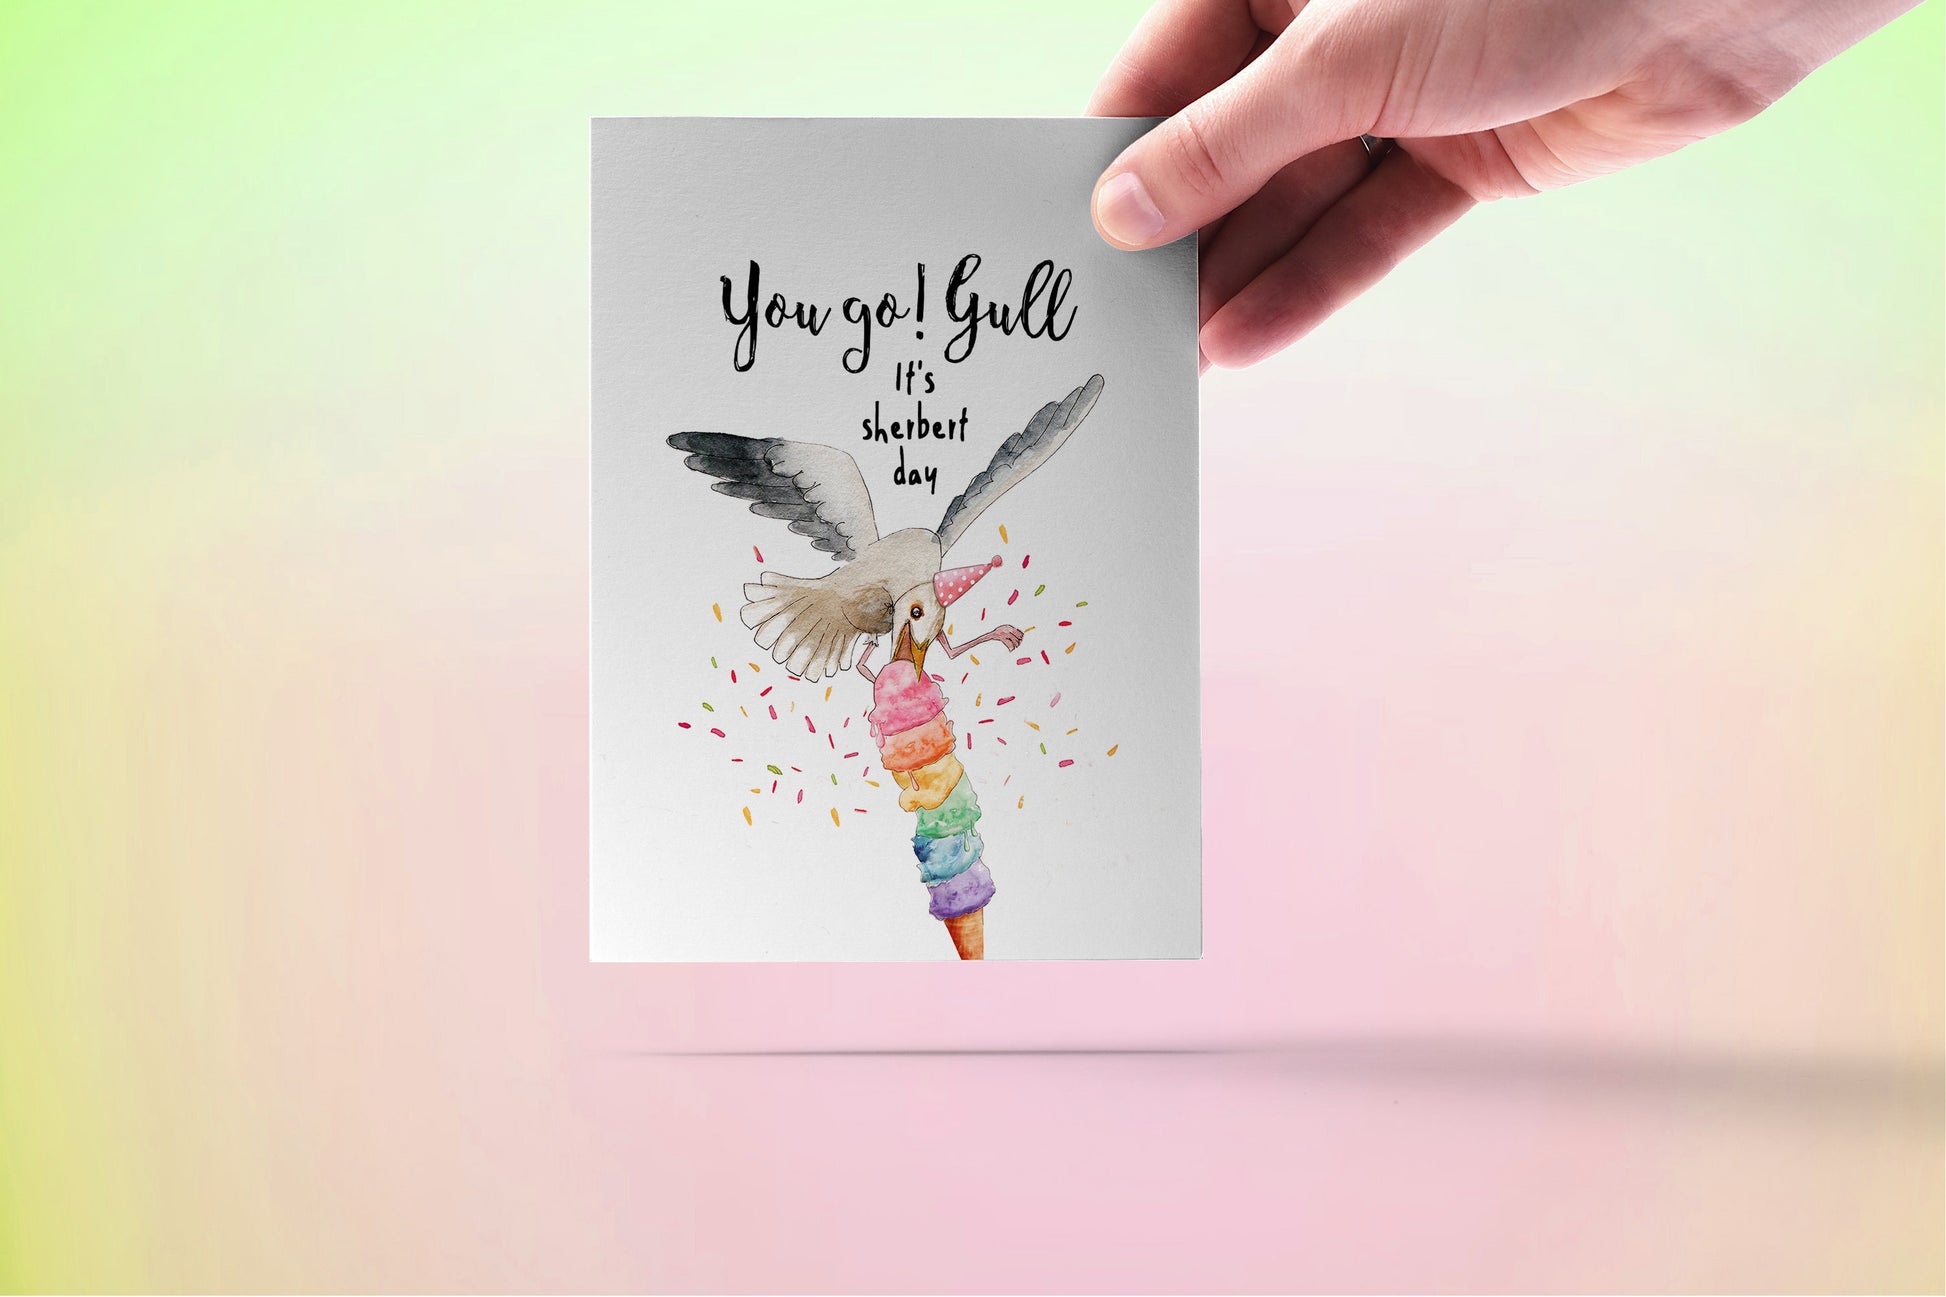 Seagull Girl Friend Birthday Cards Funny - You Go Gull It's Sherbert Day